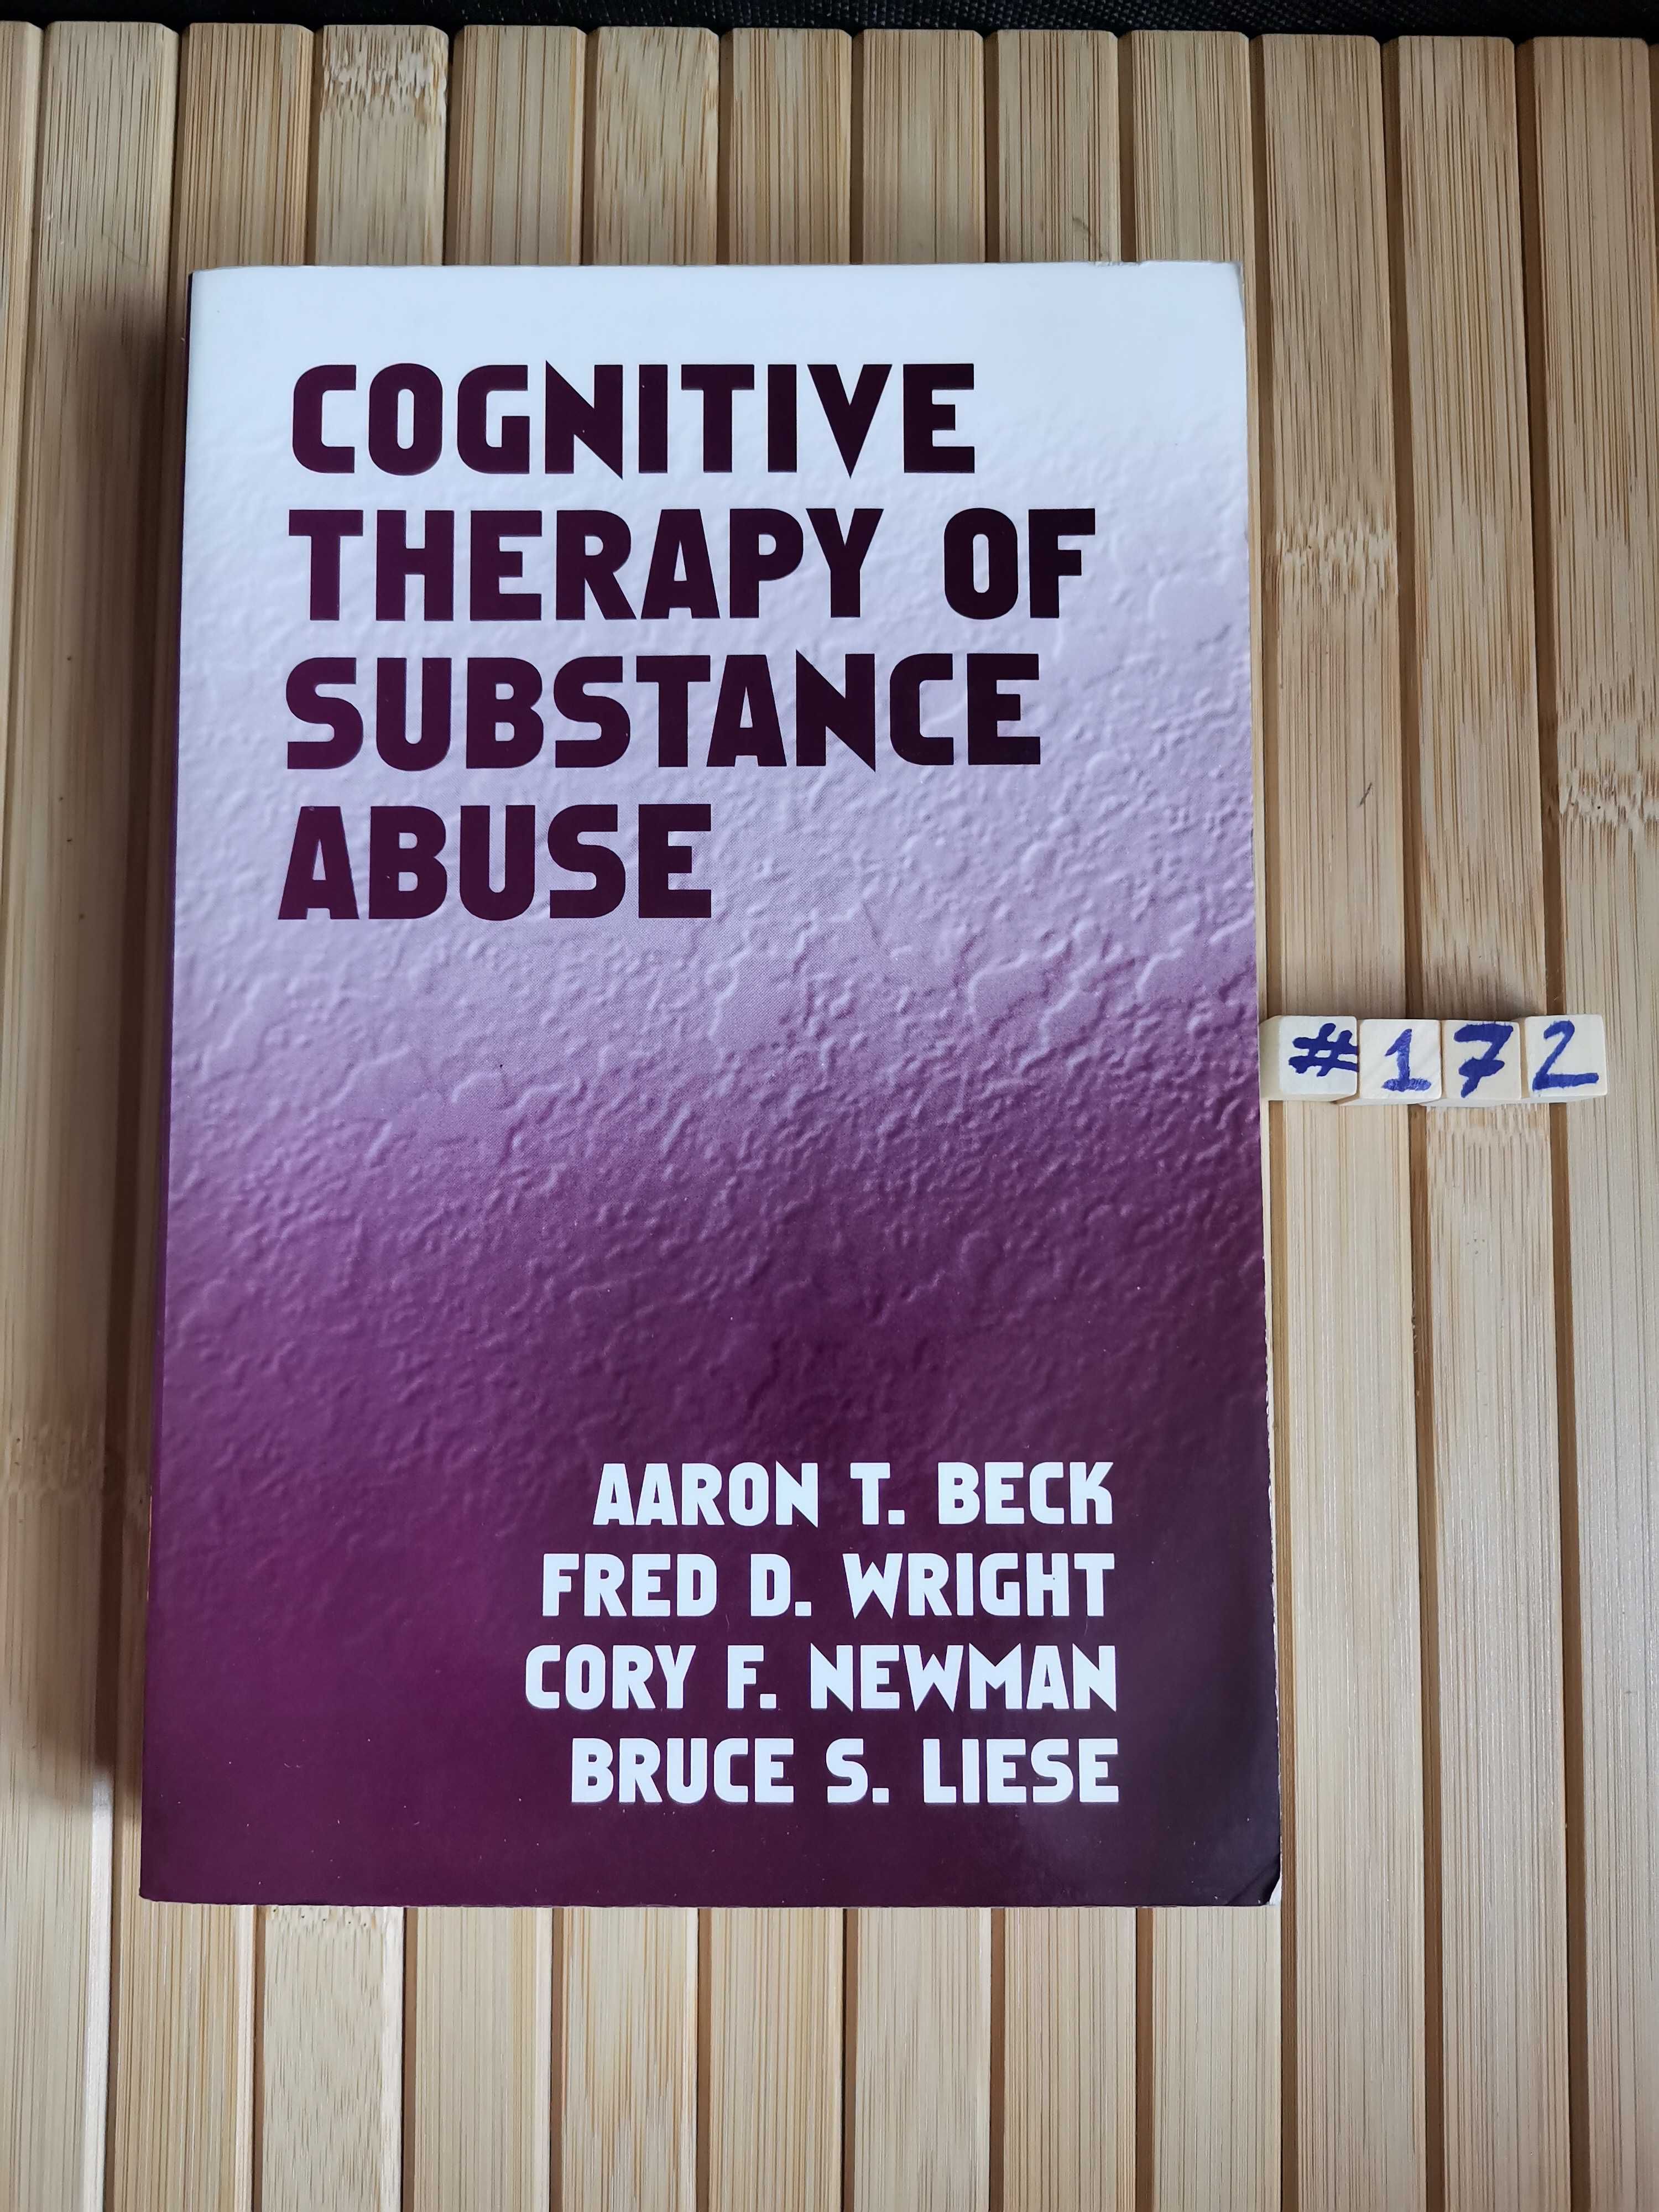 Beck Cognitive therapy of substance abuse Real foty